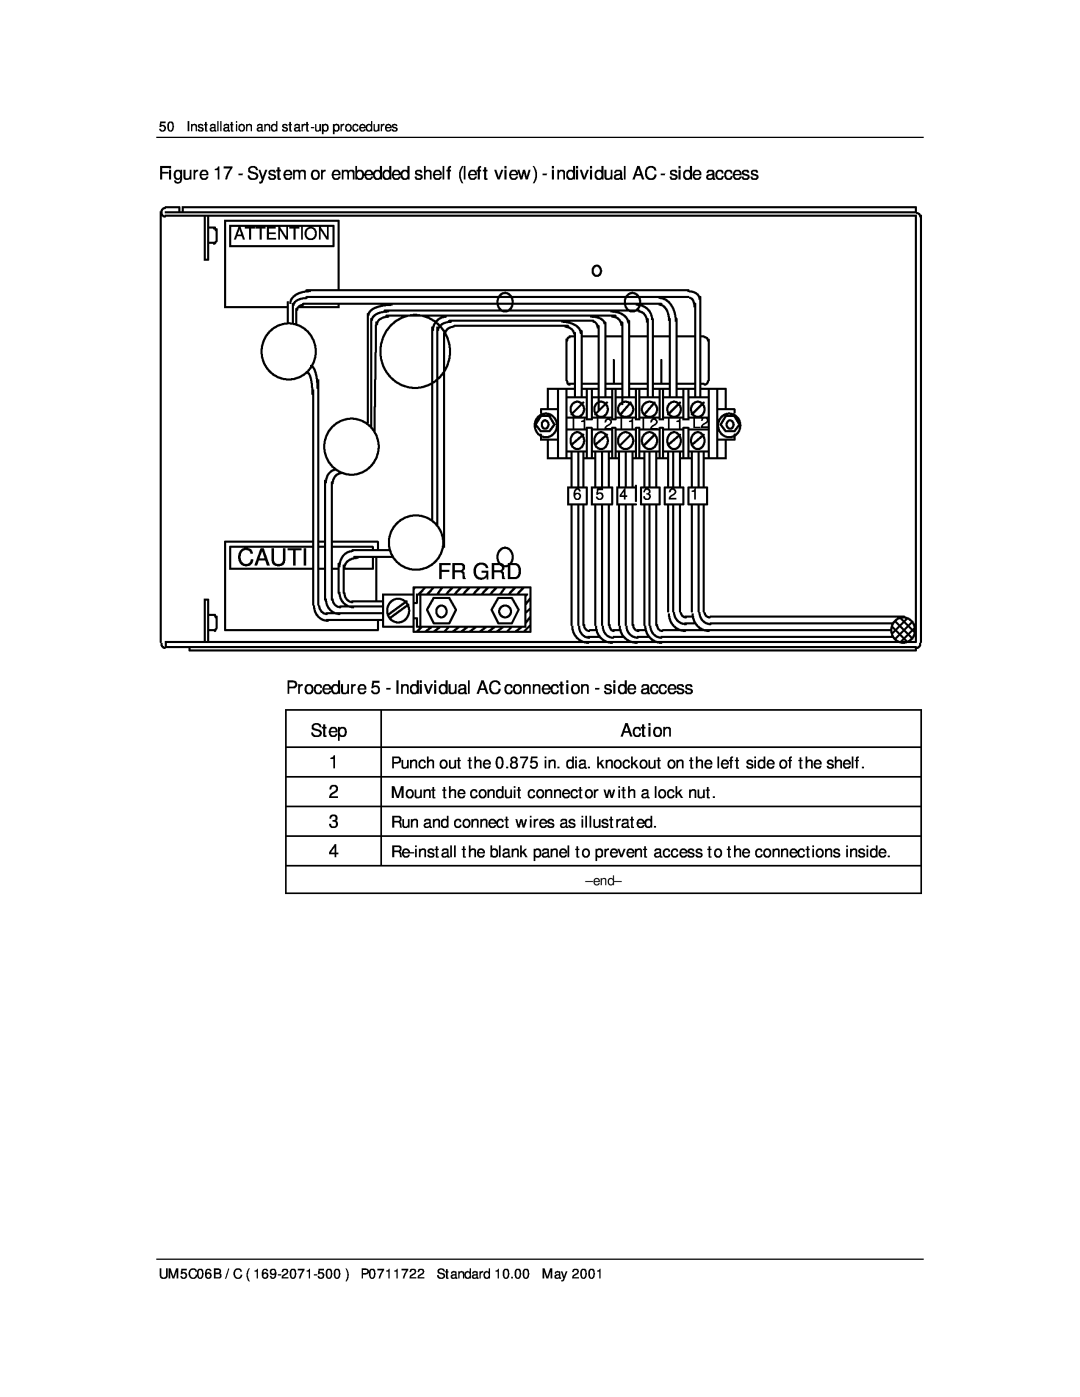 Emerson MPR15 Series, MPR25 user manual Procedure 5 - Individual AC connection - side access, Cauti, Fr Grd, Step 